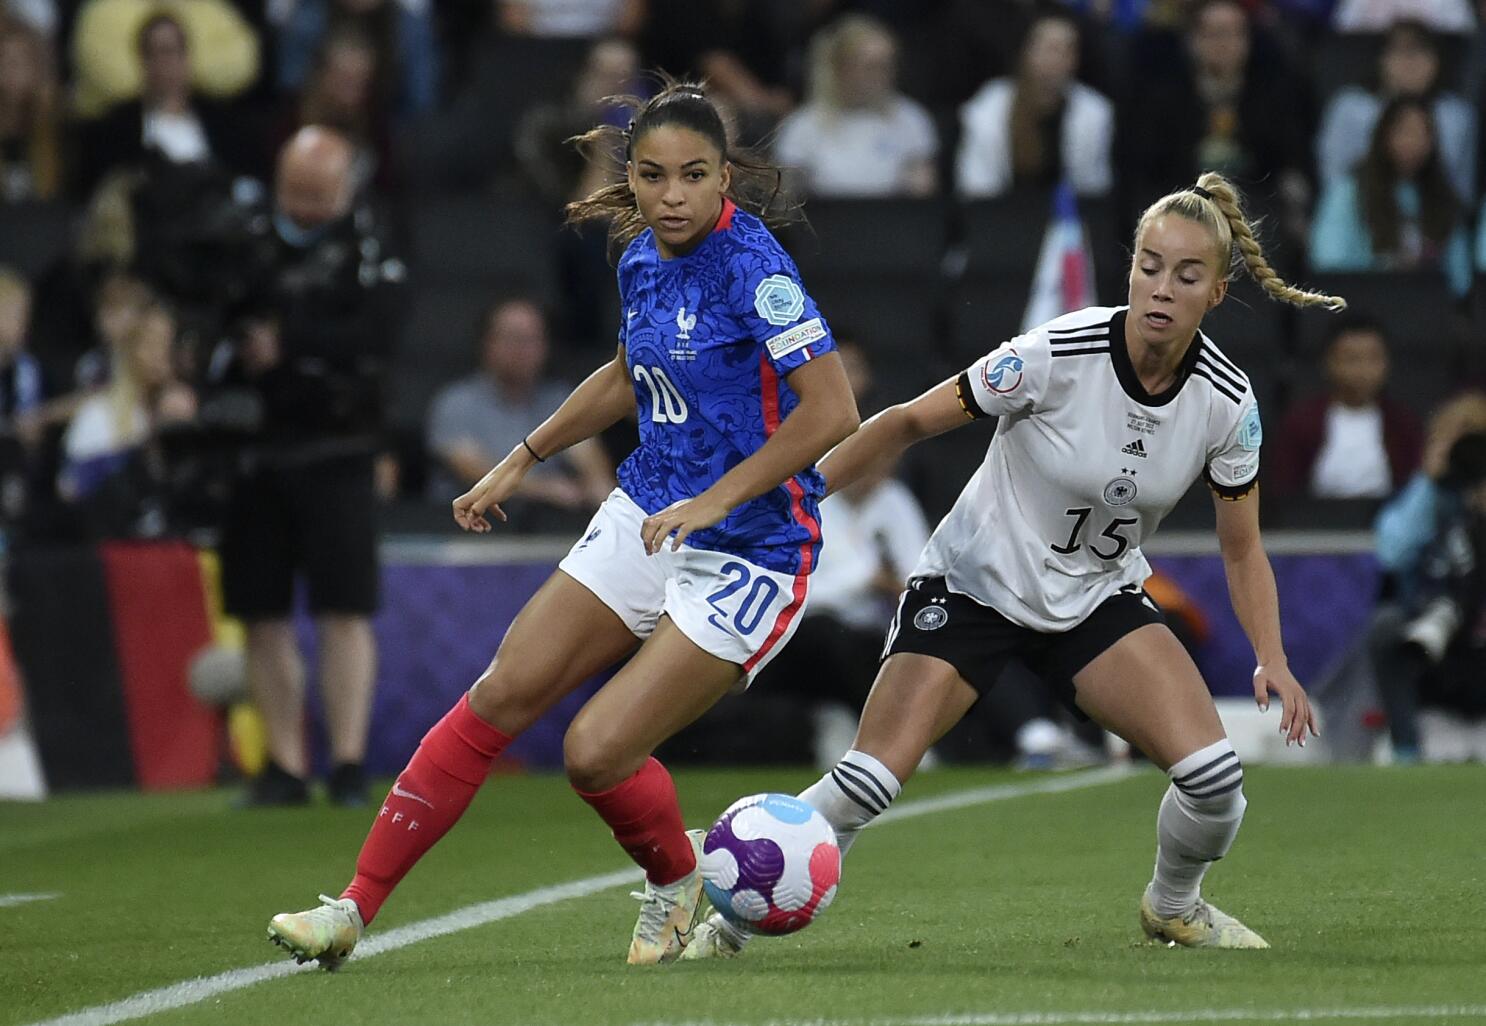 France winger Cascarino will miss Women's World Cup with ACL tear